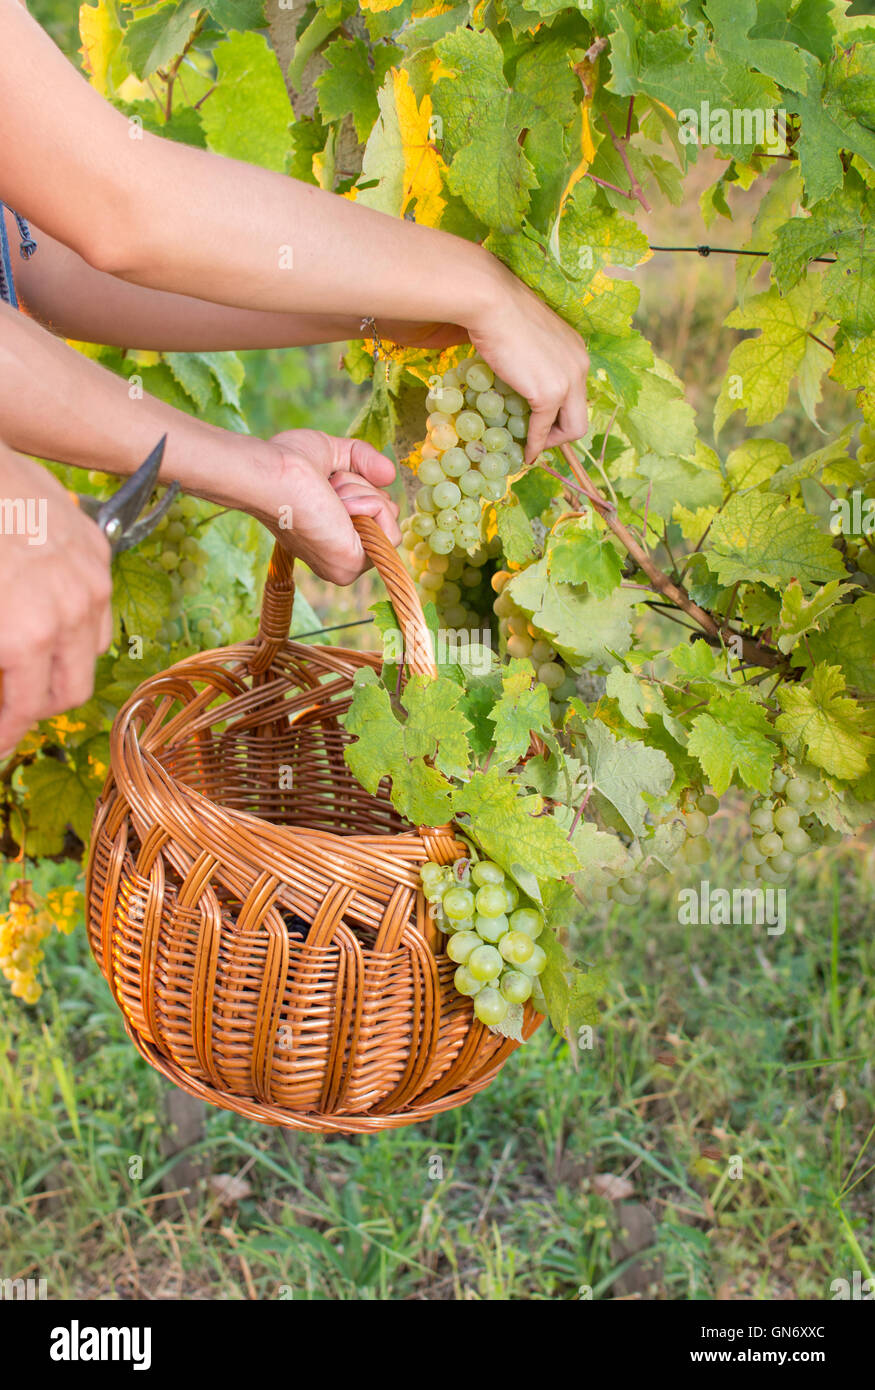 Couple in grape picking at the vineyard with a wicker basket Stock Photo